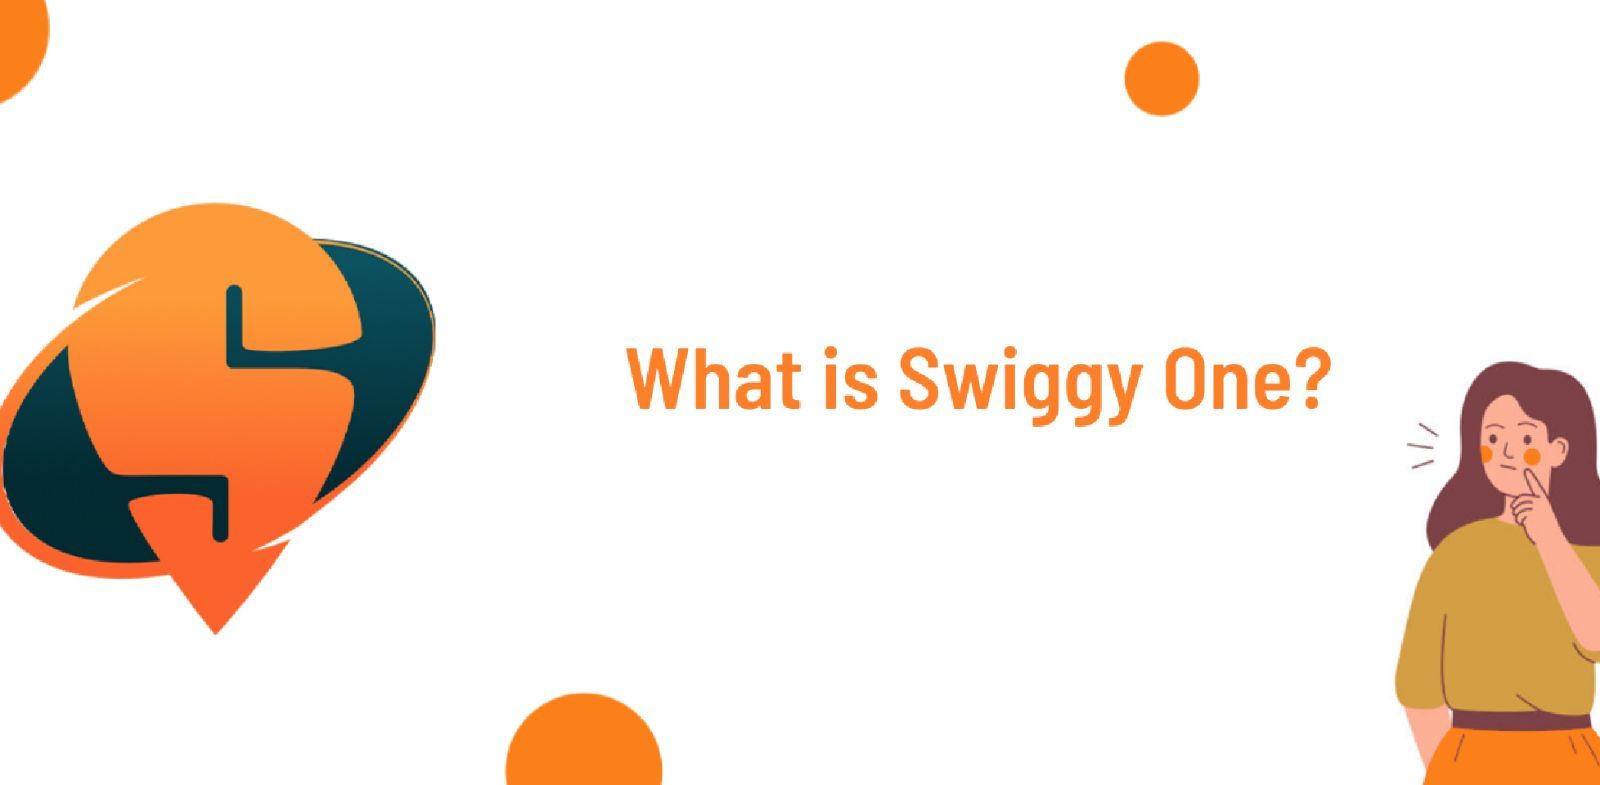 What is Swiggy One?